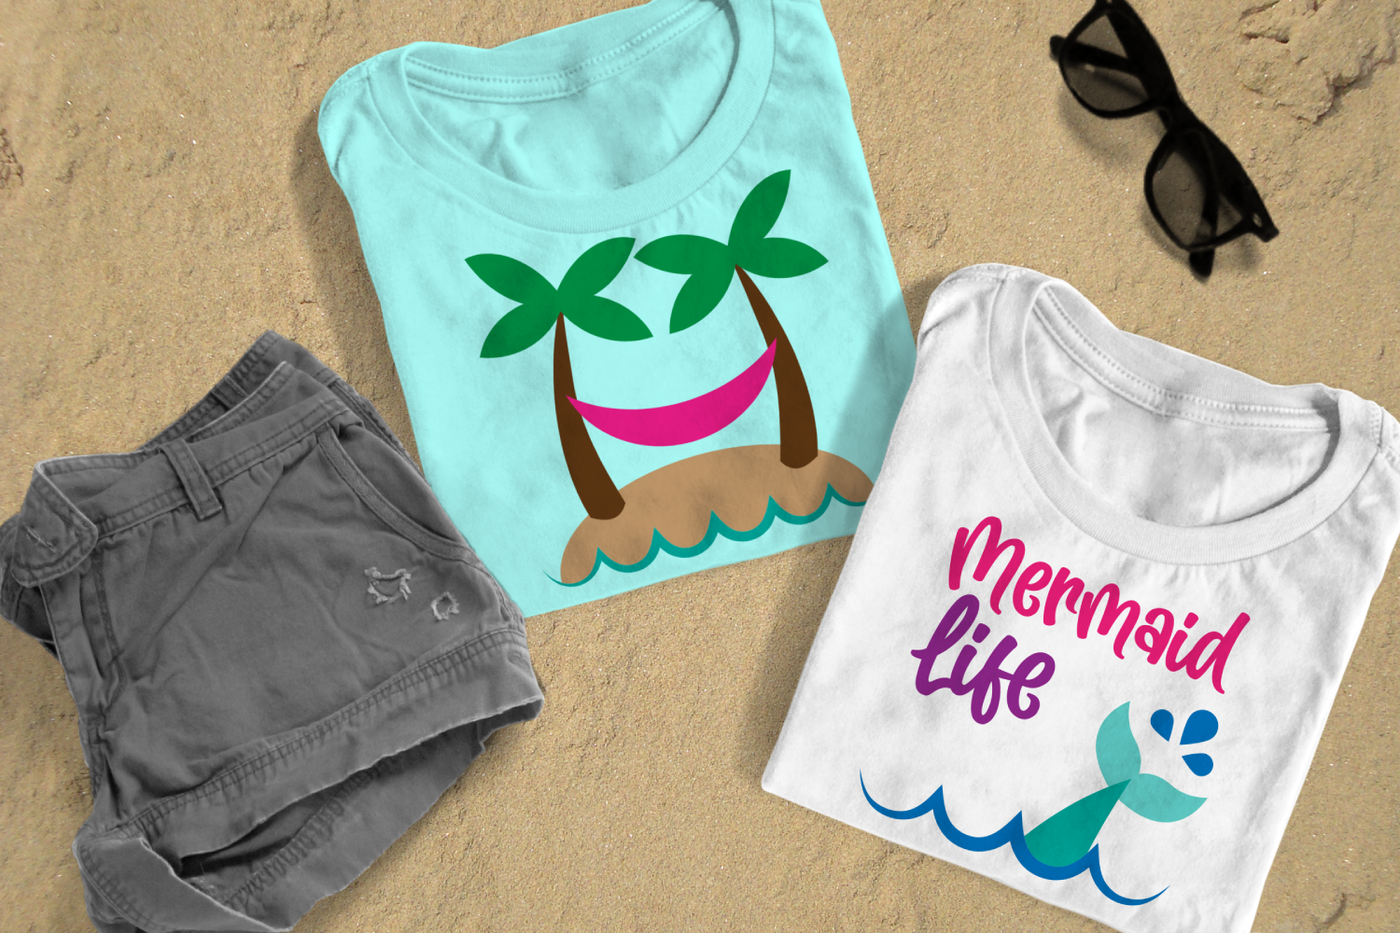 Beach design duo. One design has an island hammock, and the other features a mermaid tail with the phrase "Mermaid life."